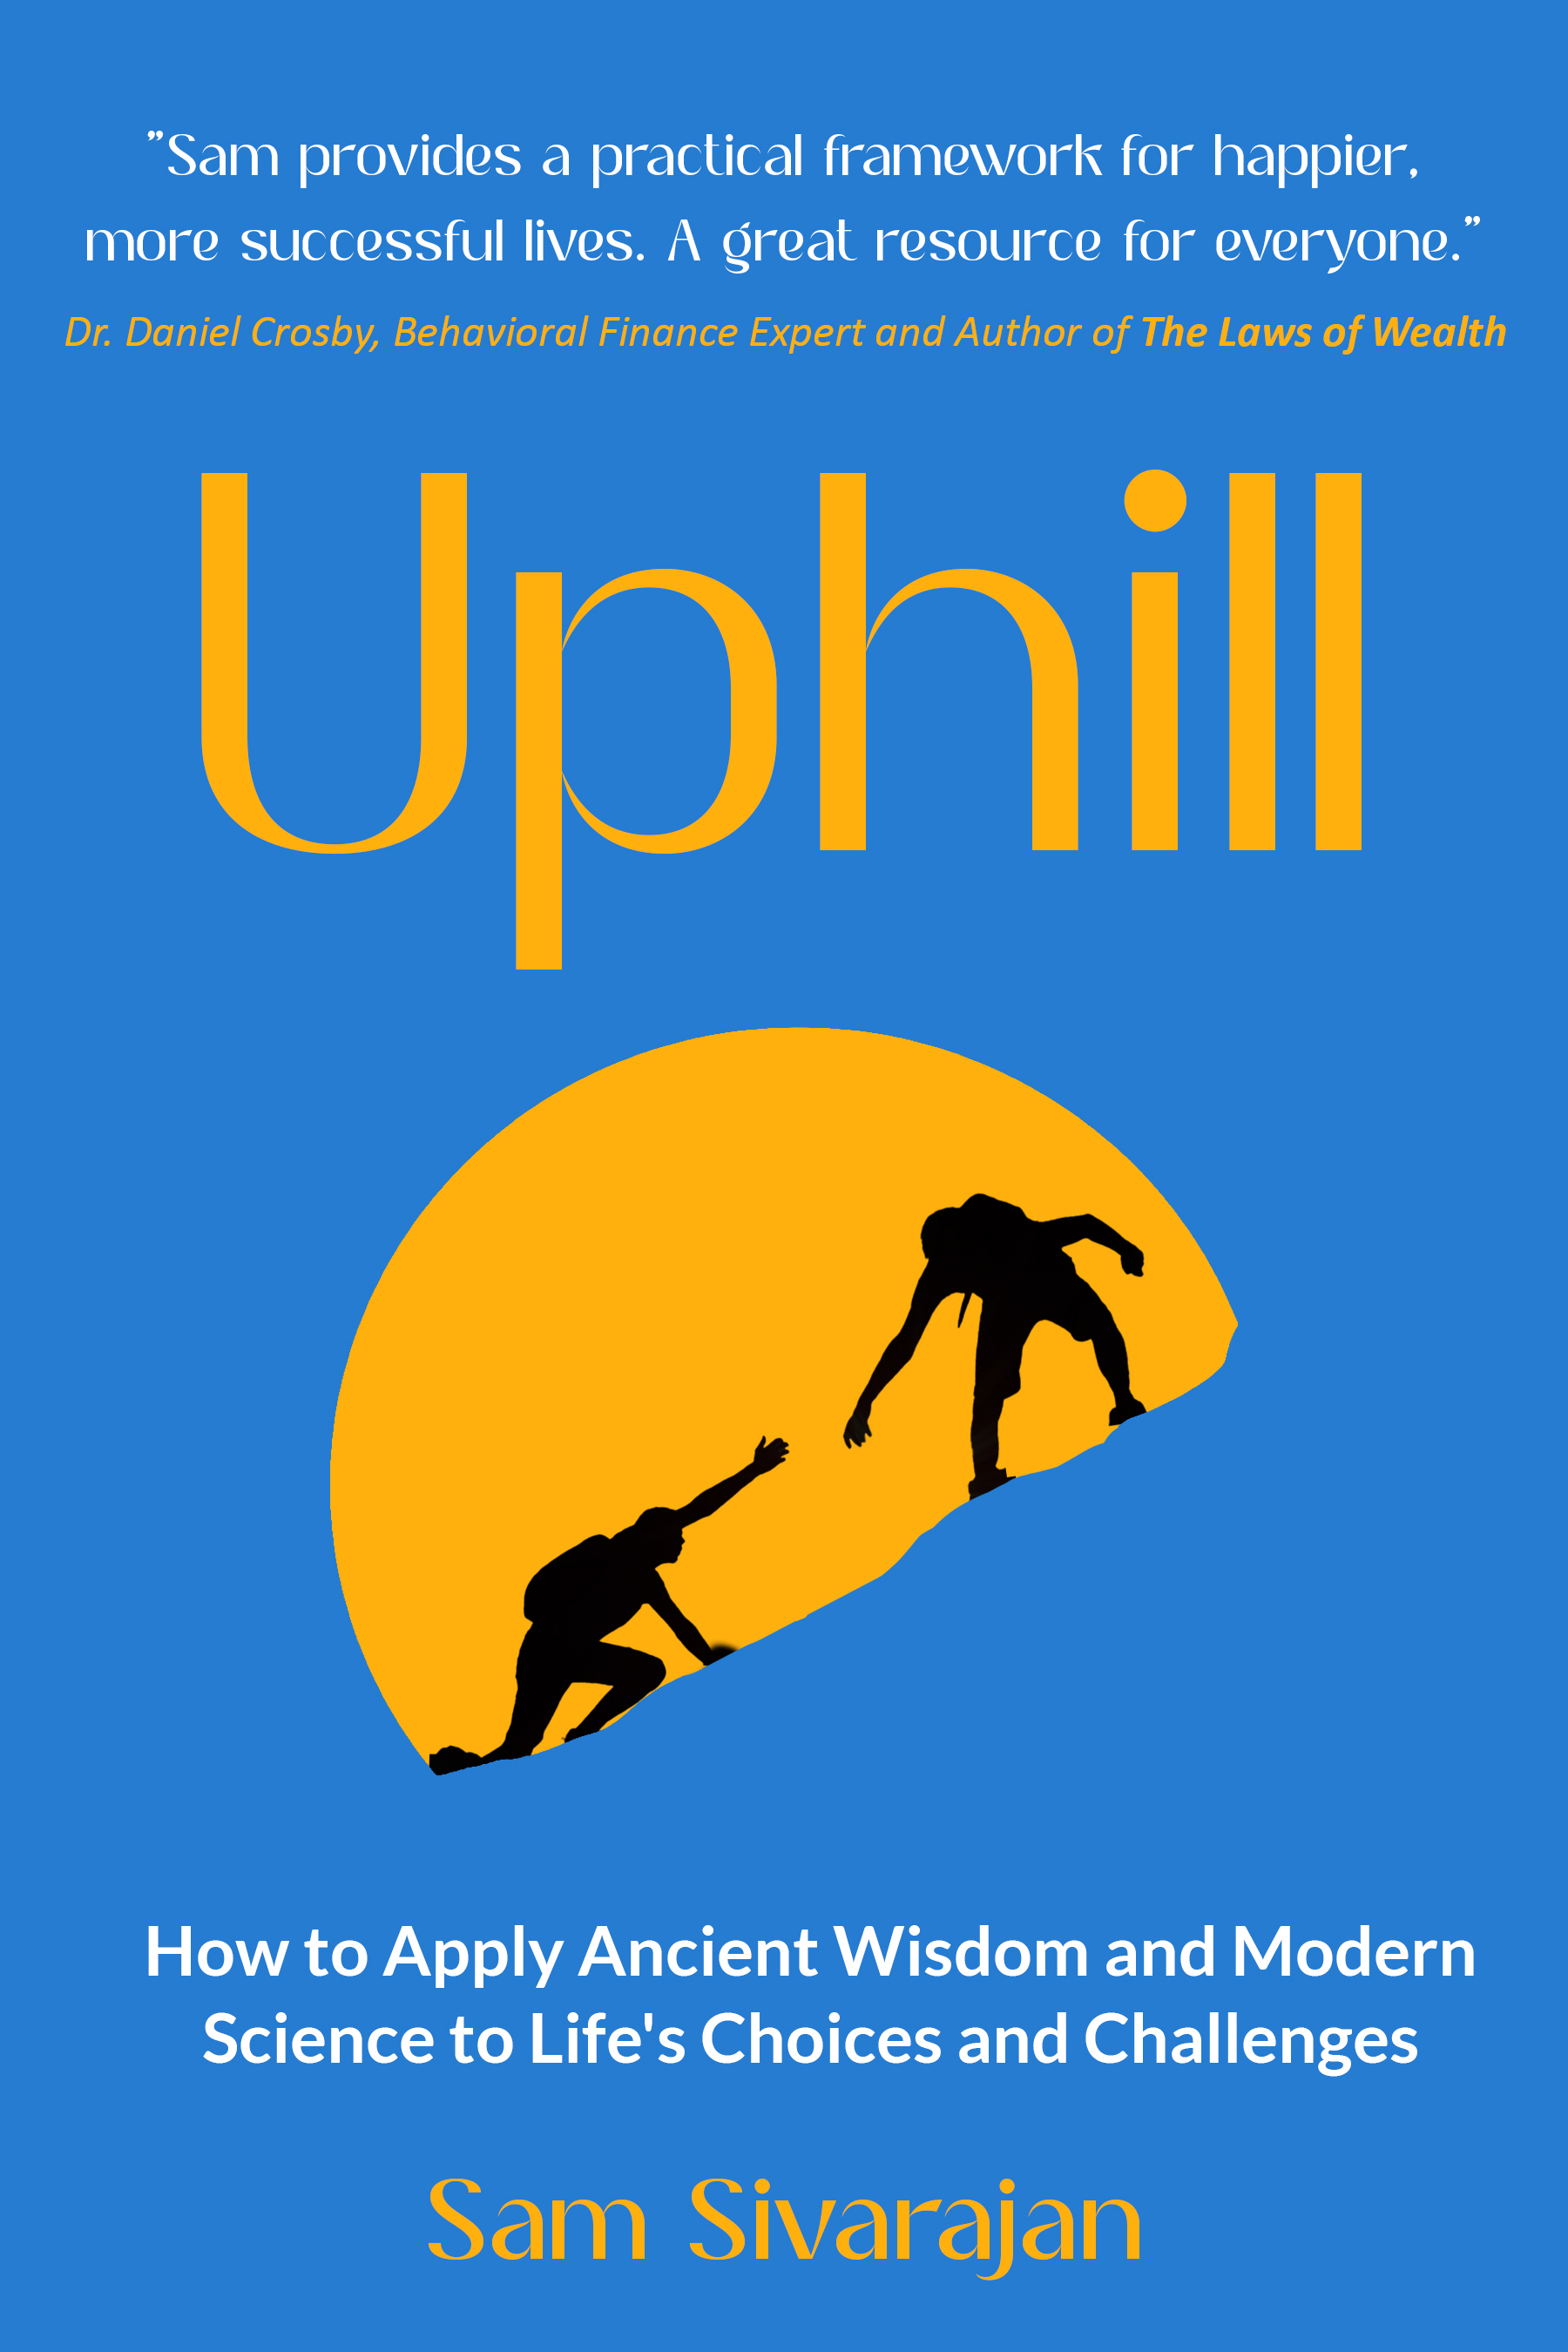 Sam Sivarajan’s 2nd Book, UPHILL, Marries Behavioral Science With Stoic Philosophy to Help Readers Tackle Modern Life's Challenges